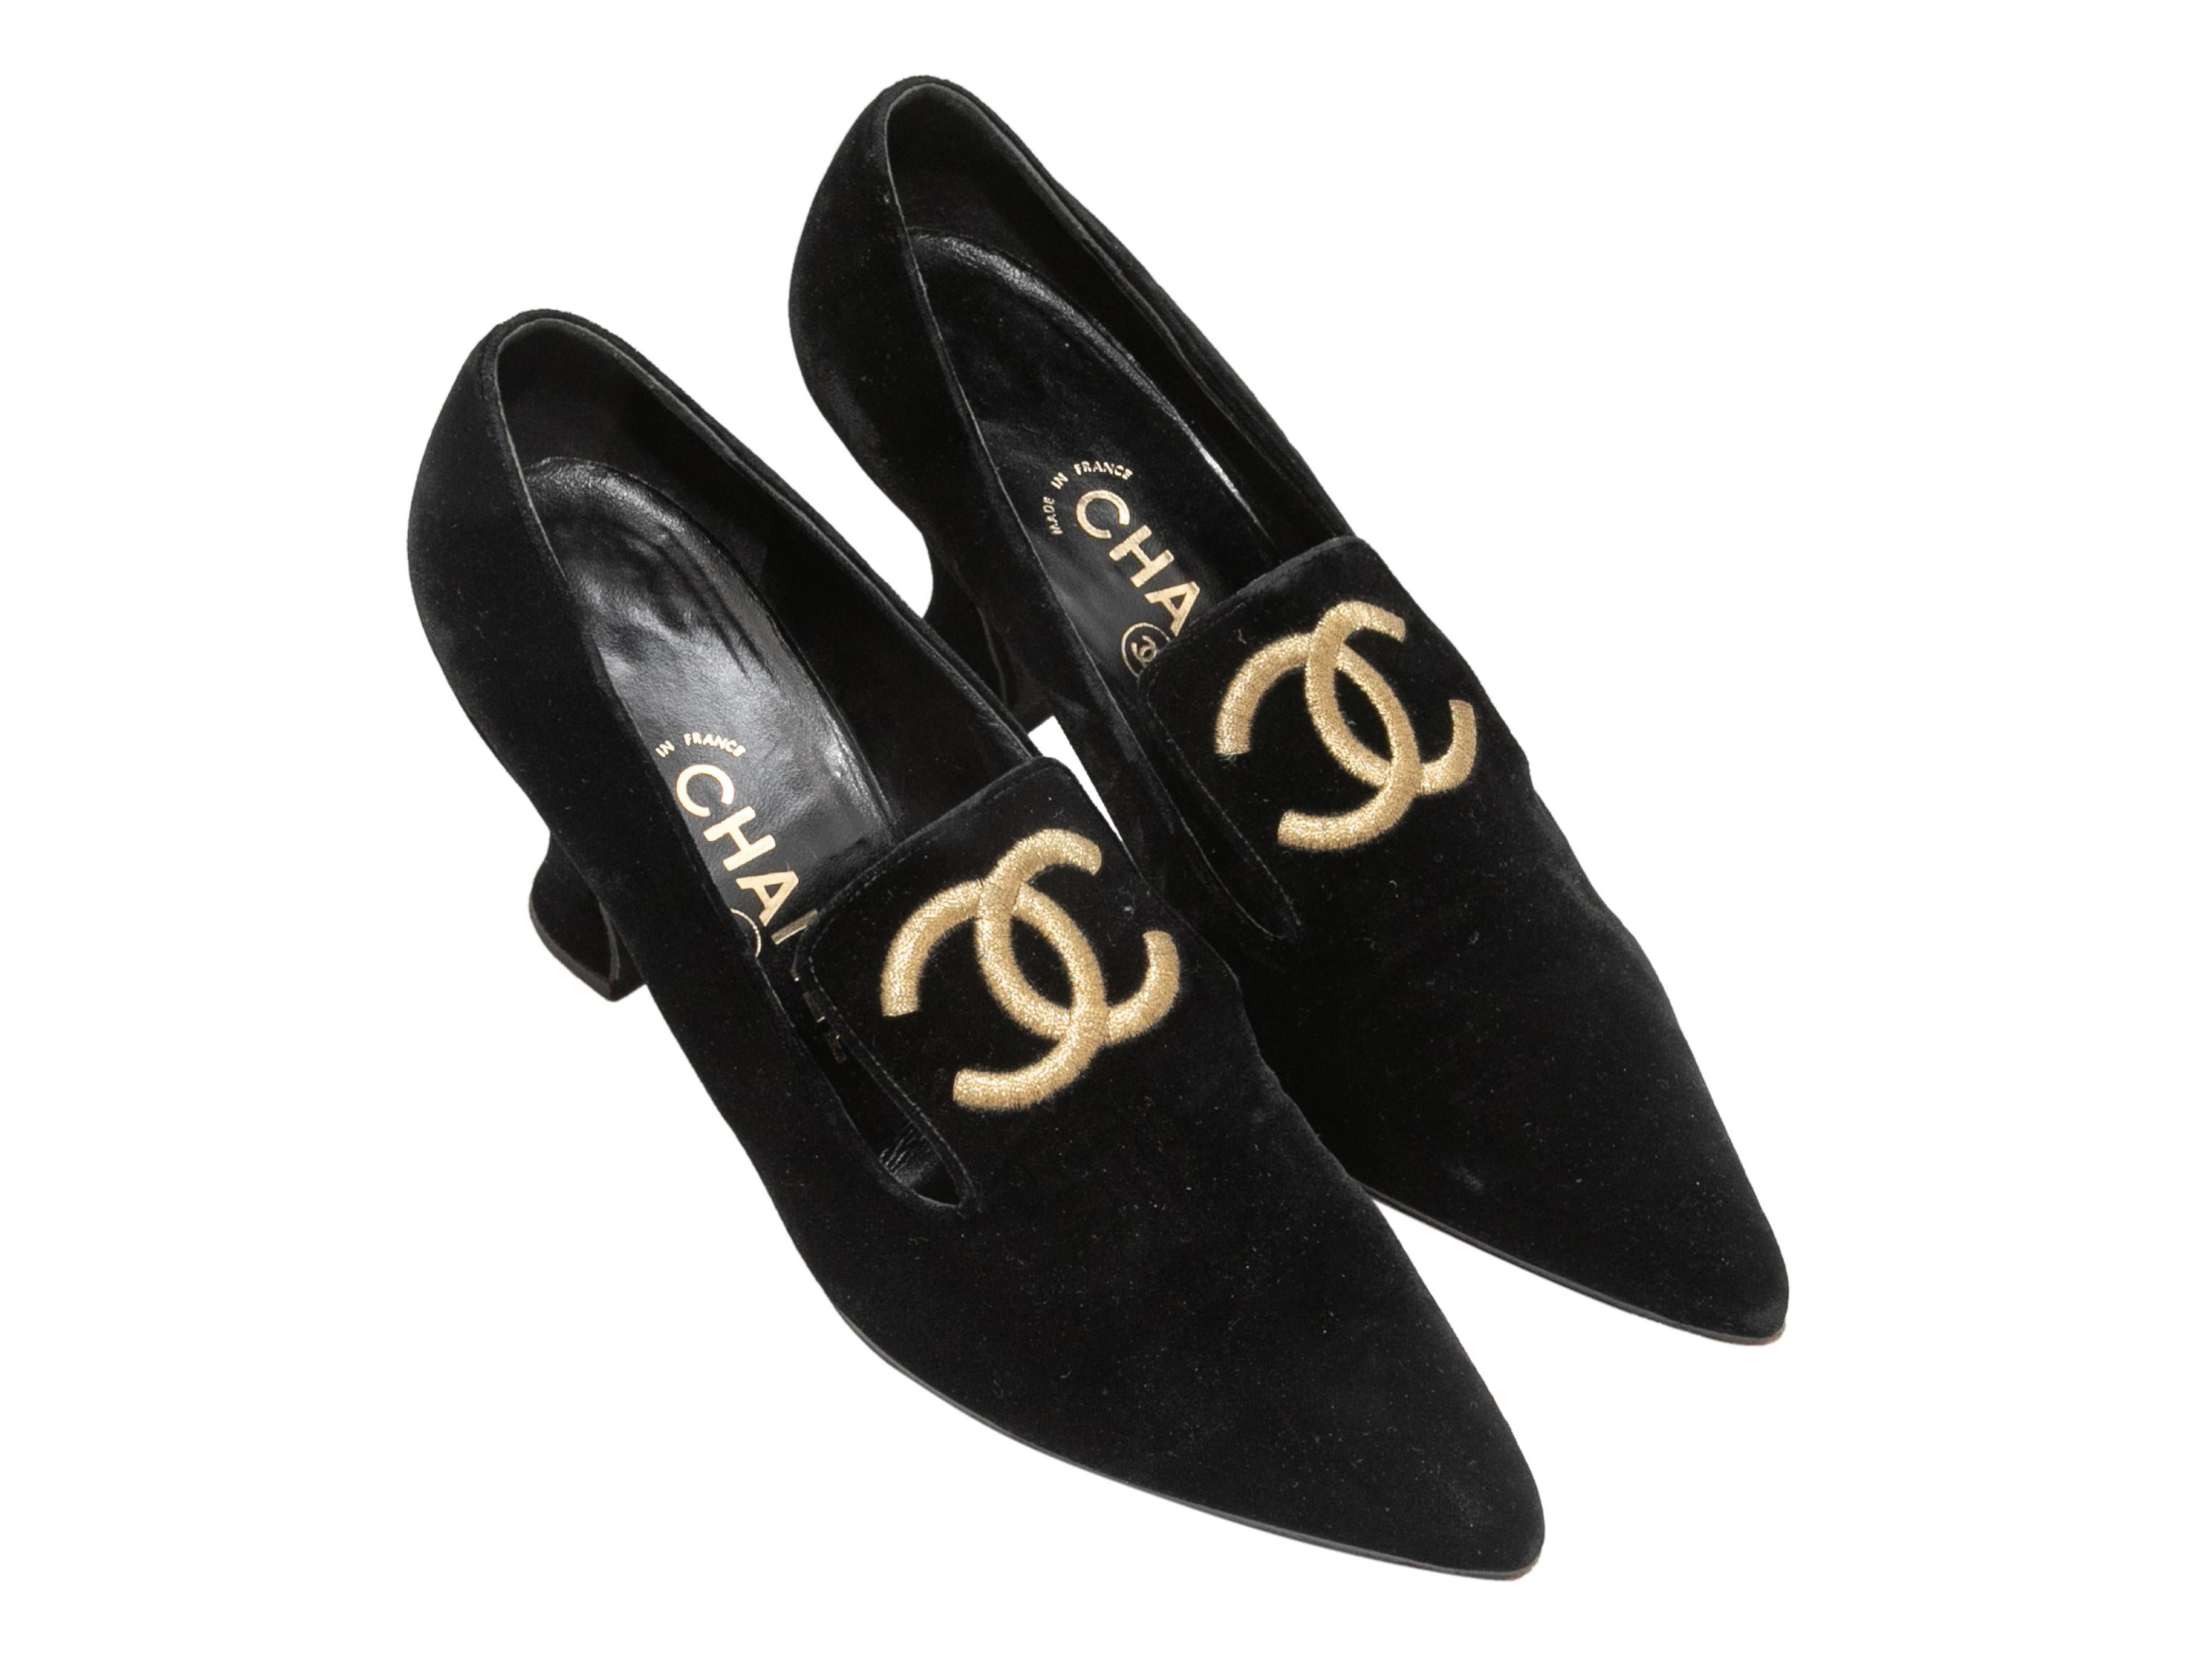 Vintage black velvet pointed-toe pumps by Chanel. Embroidered gold CC logos at tops. Kitten heels. 3